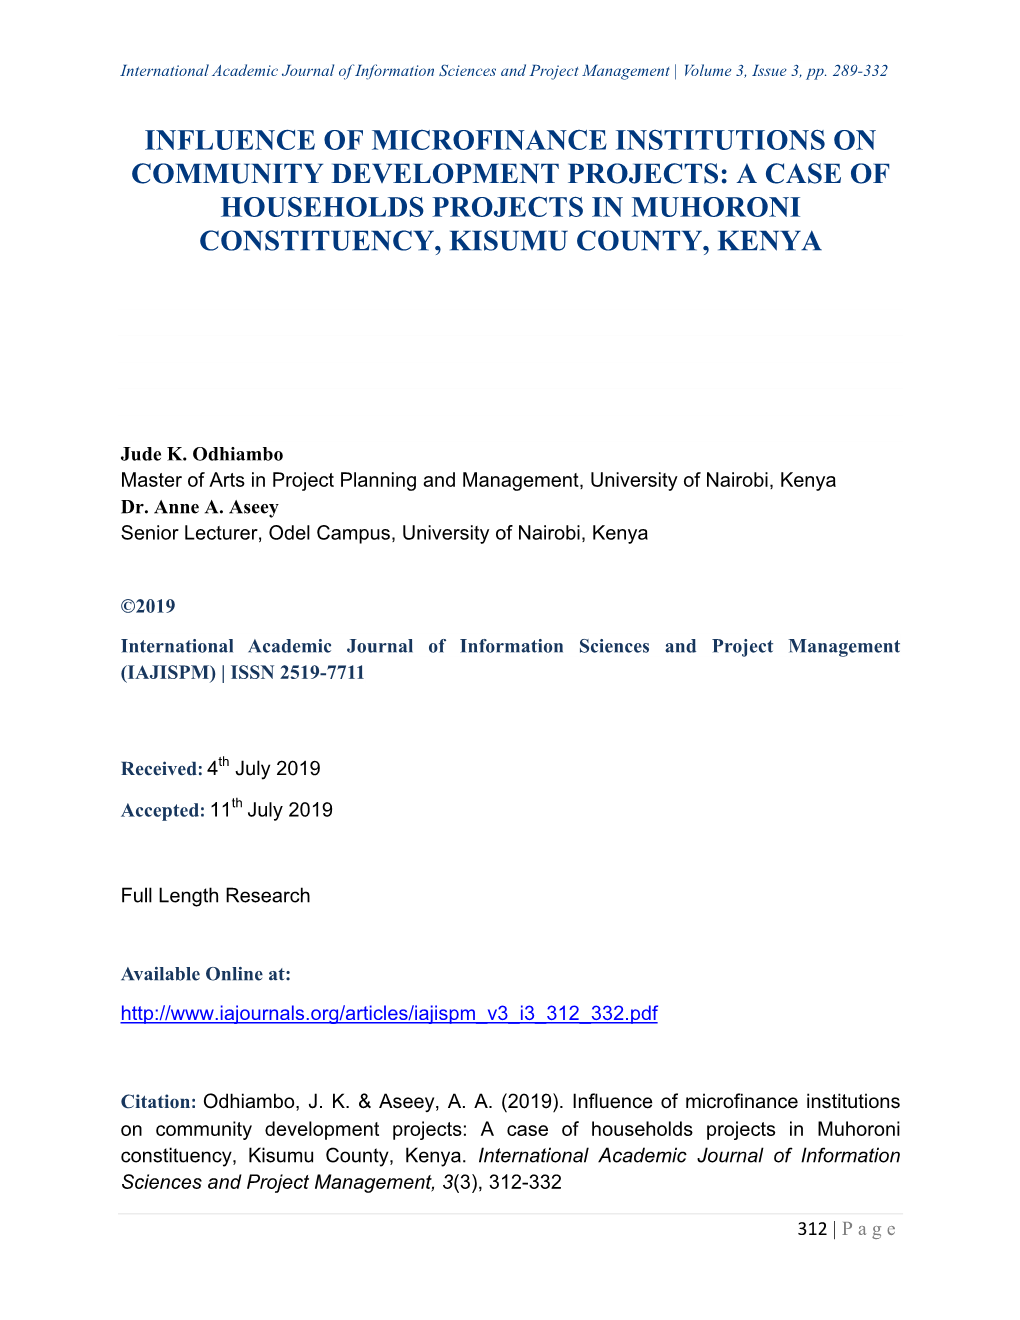 A Case of Households Projects in Muhoroni Constituency, Kisumu County, Kenya